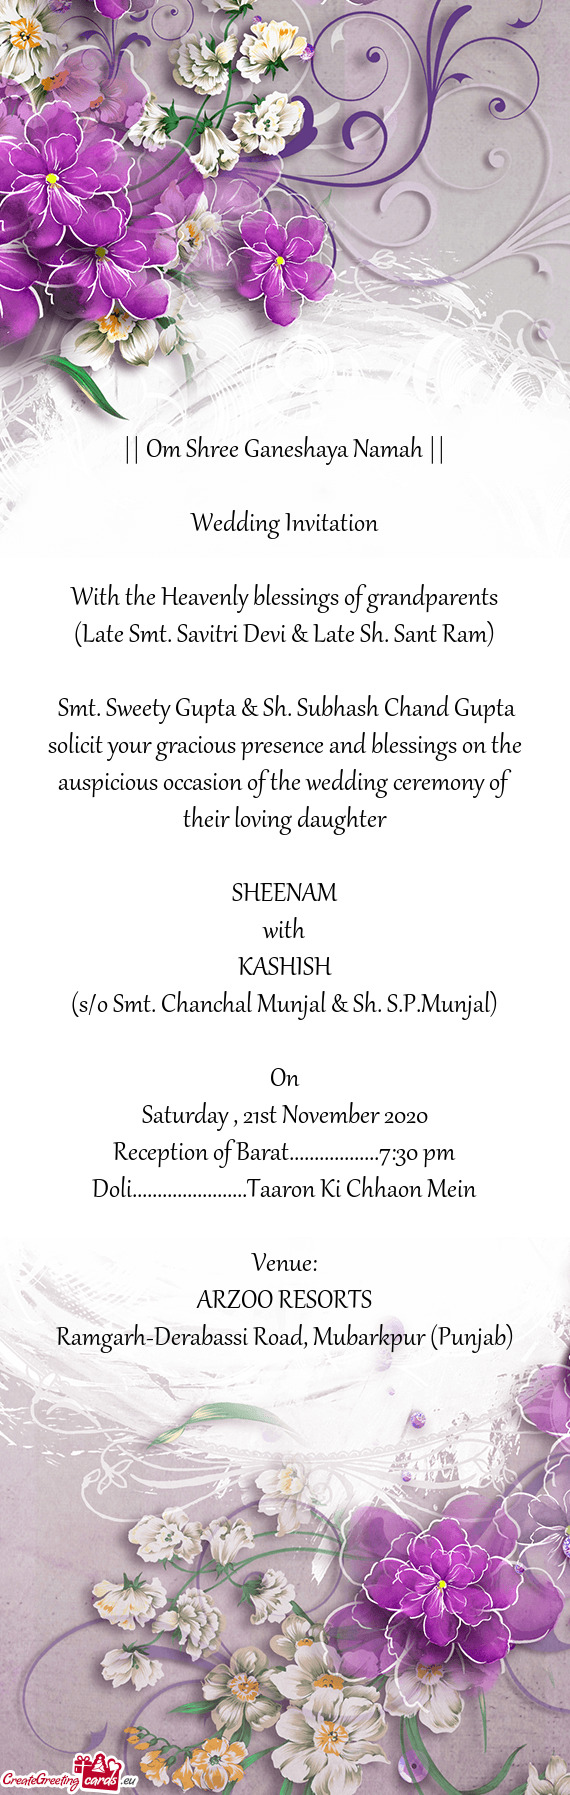 Solicit your gracious presence and blessings on the auspicious occasion of the wedding ceremony of t